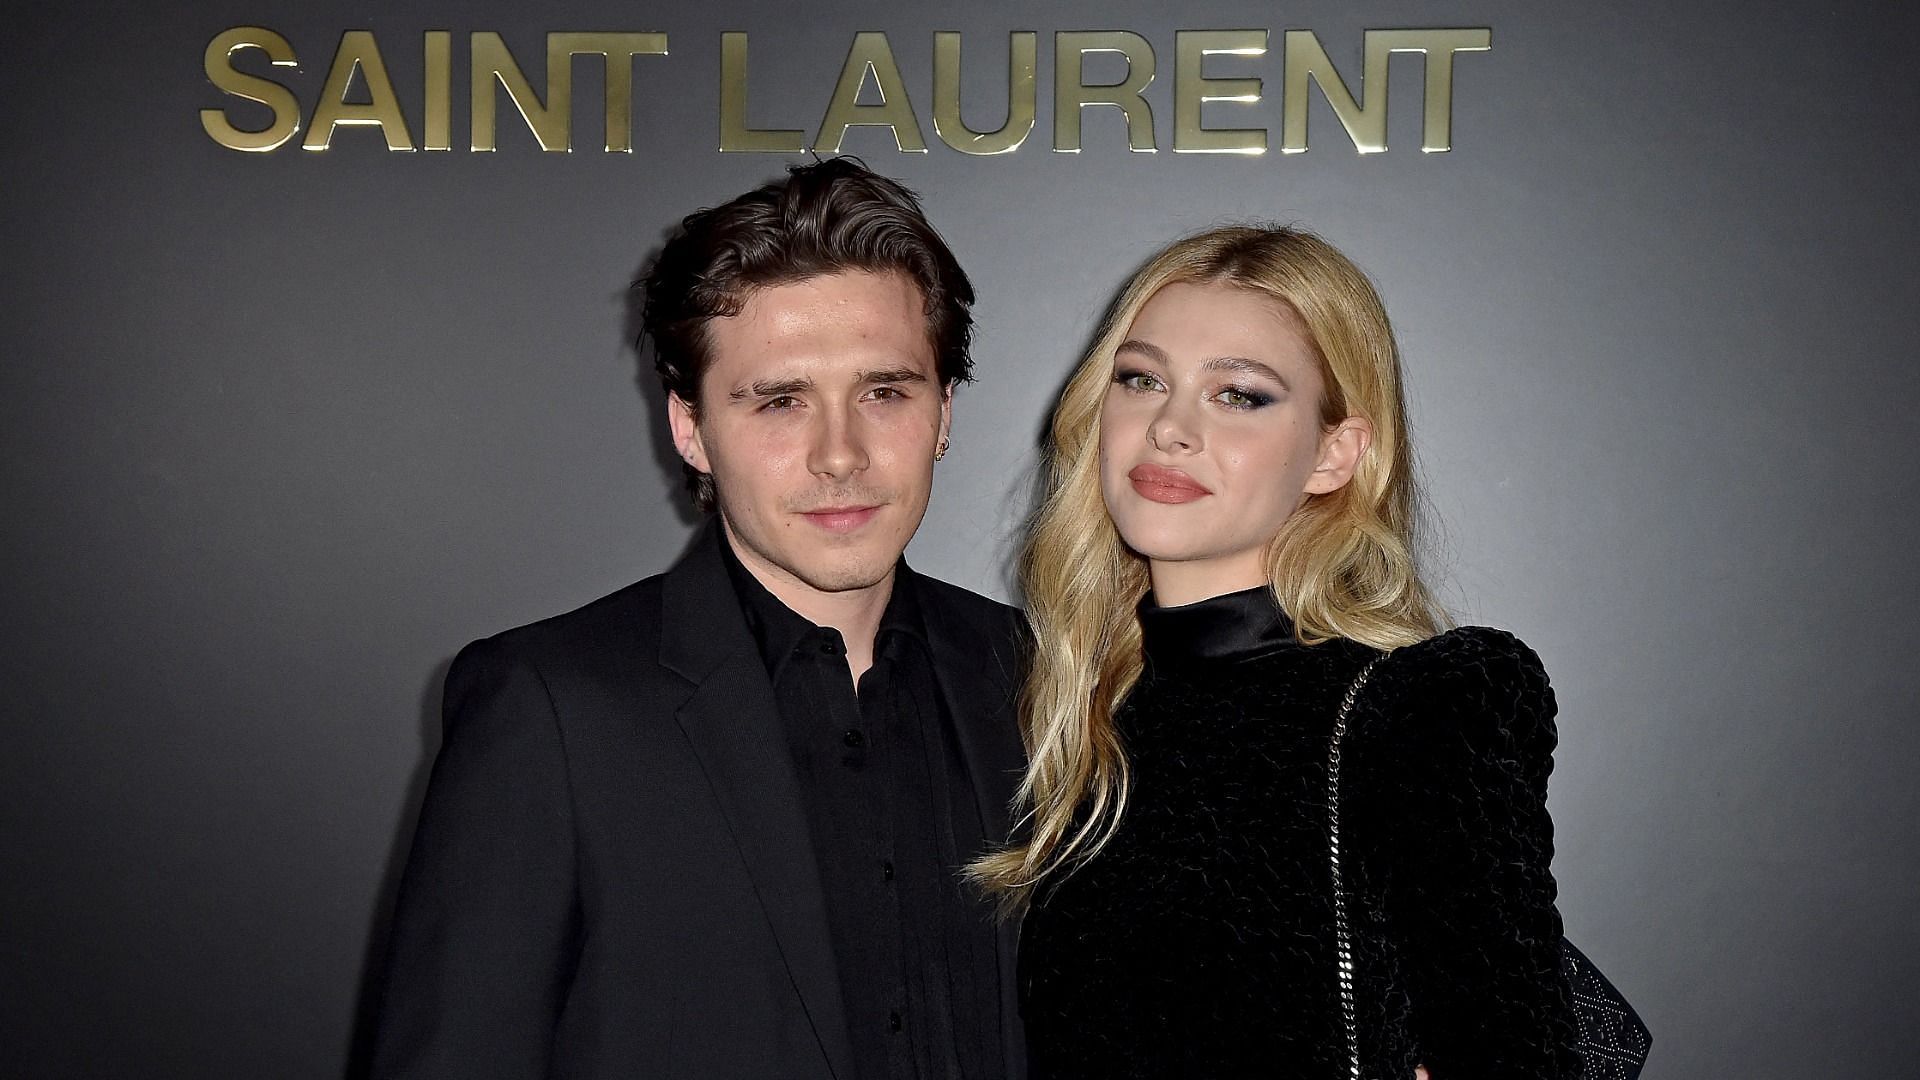 Brooklyn Beckham and Nicola Peltz first sparked dating rumors in October 2019 (Image via Getty Images/Dominique Charriau)